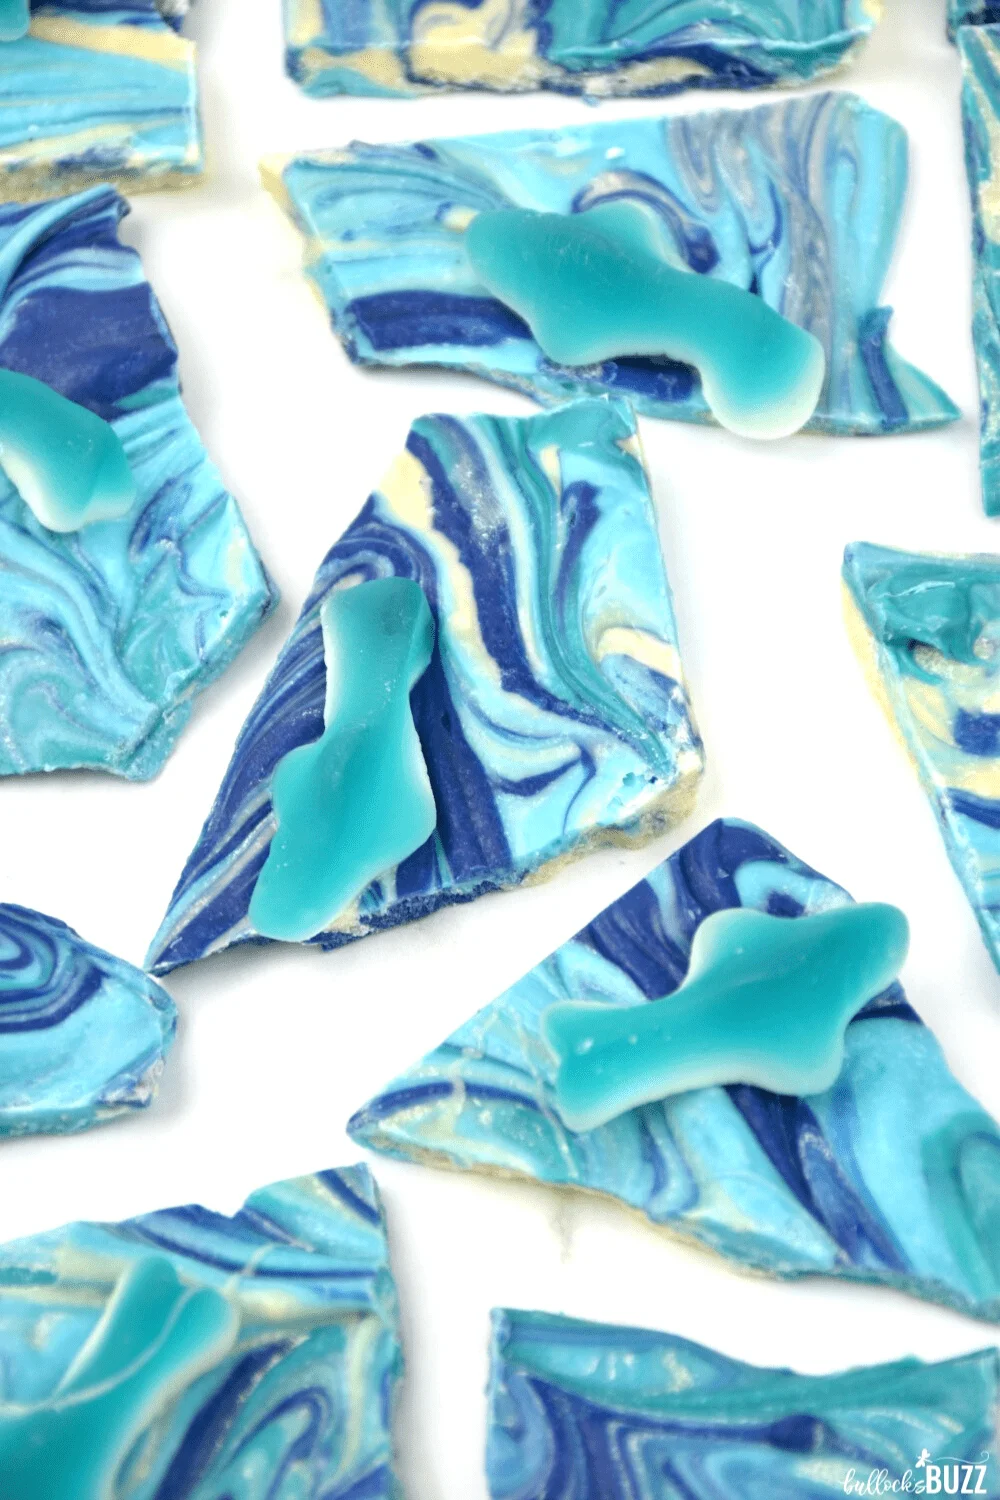 This easy Shark Bark Candy recipe is ideal for an ocean-themed celebration or a Shark Week treat!